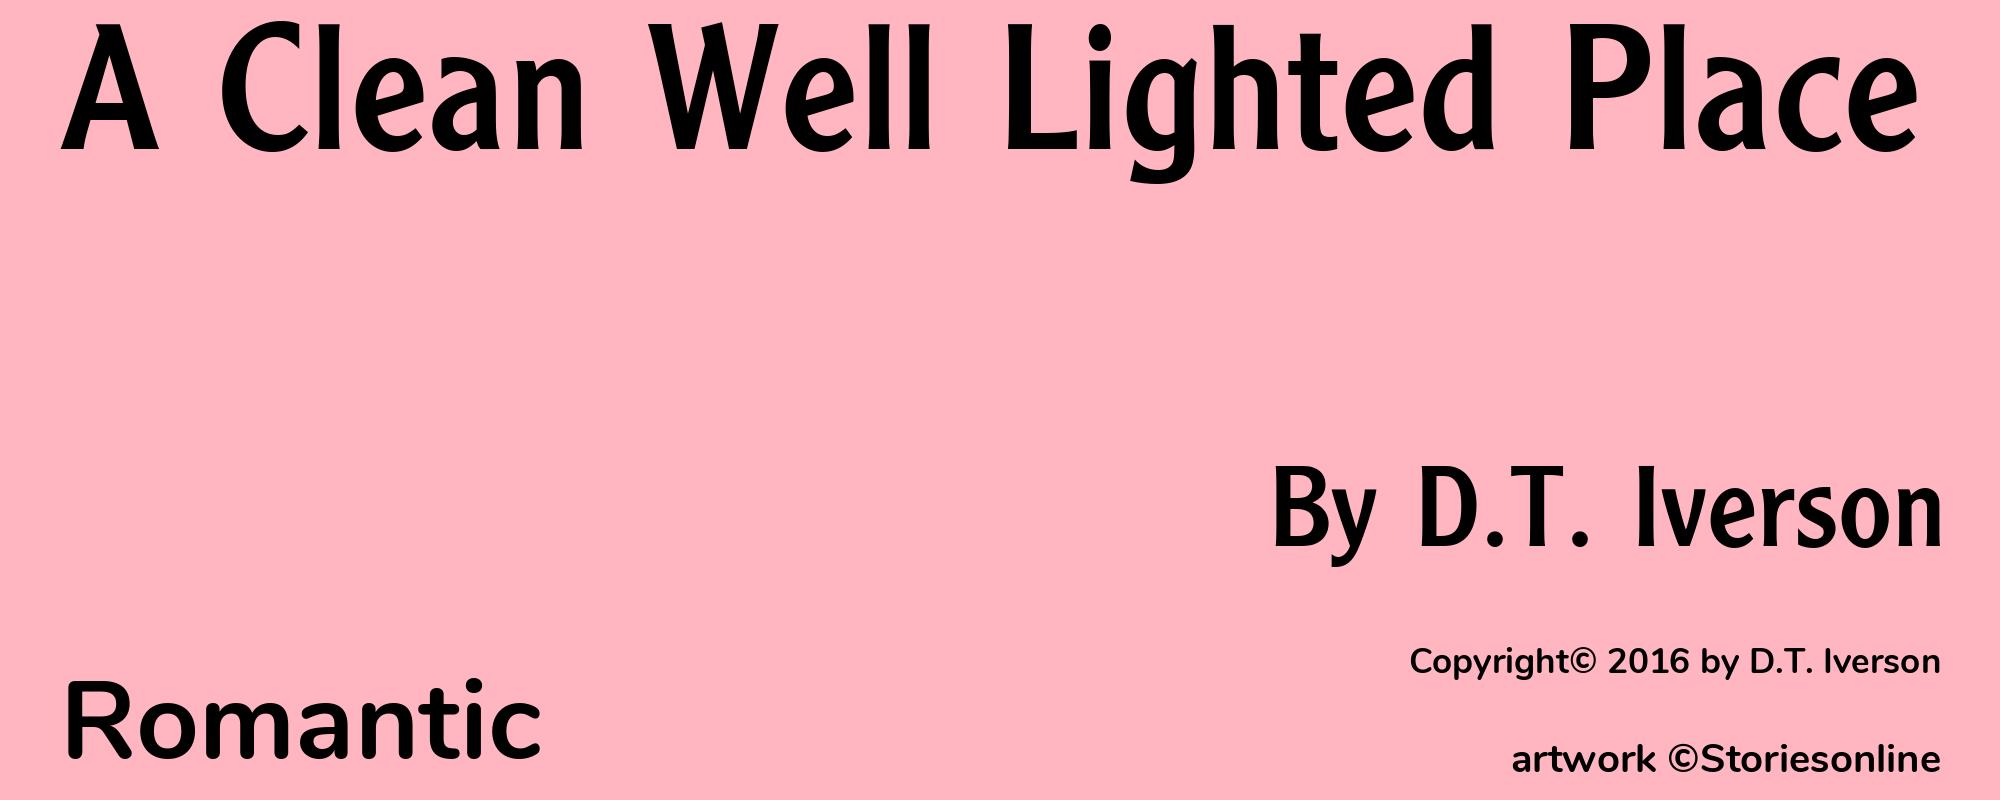 A Clean Well Lighted Place - Cover